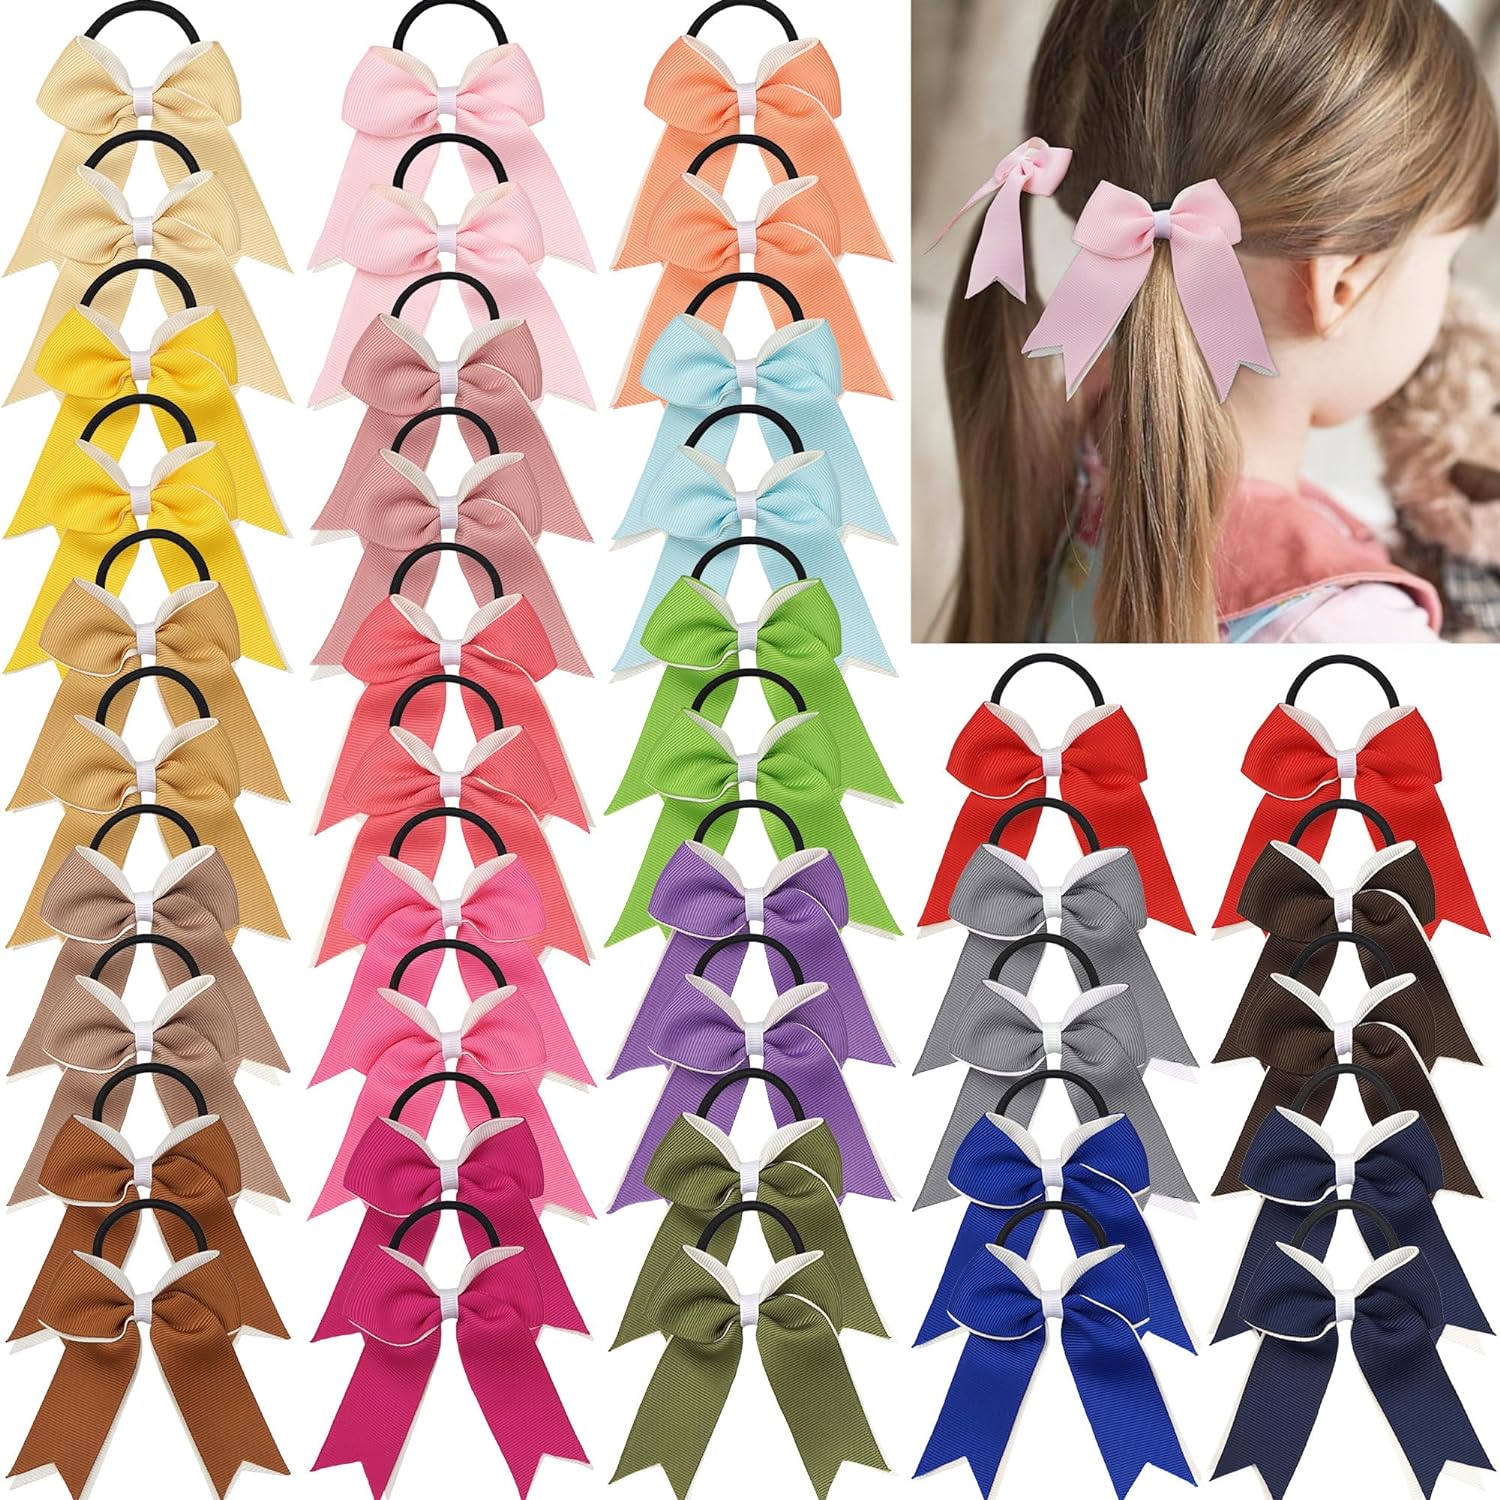 32PCS Red Bows for Girls Oaoleer Grosgrain Ribbon Red Hair Accessories Set  Include Hair Bows Cheer Bows Alligator Hair Clips Curly Koker Bows Bows  Hair Tie Hair Barrettes Headbands for Little Girls